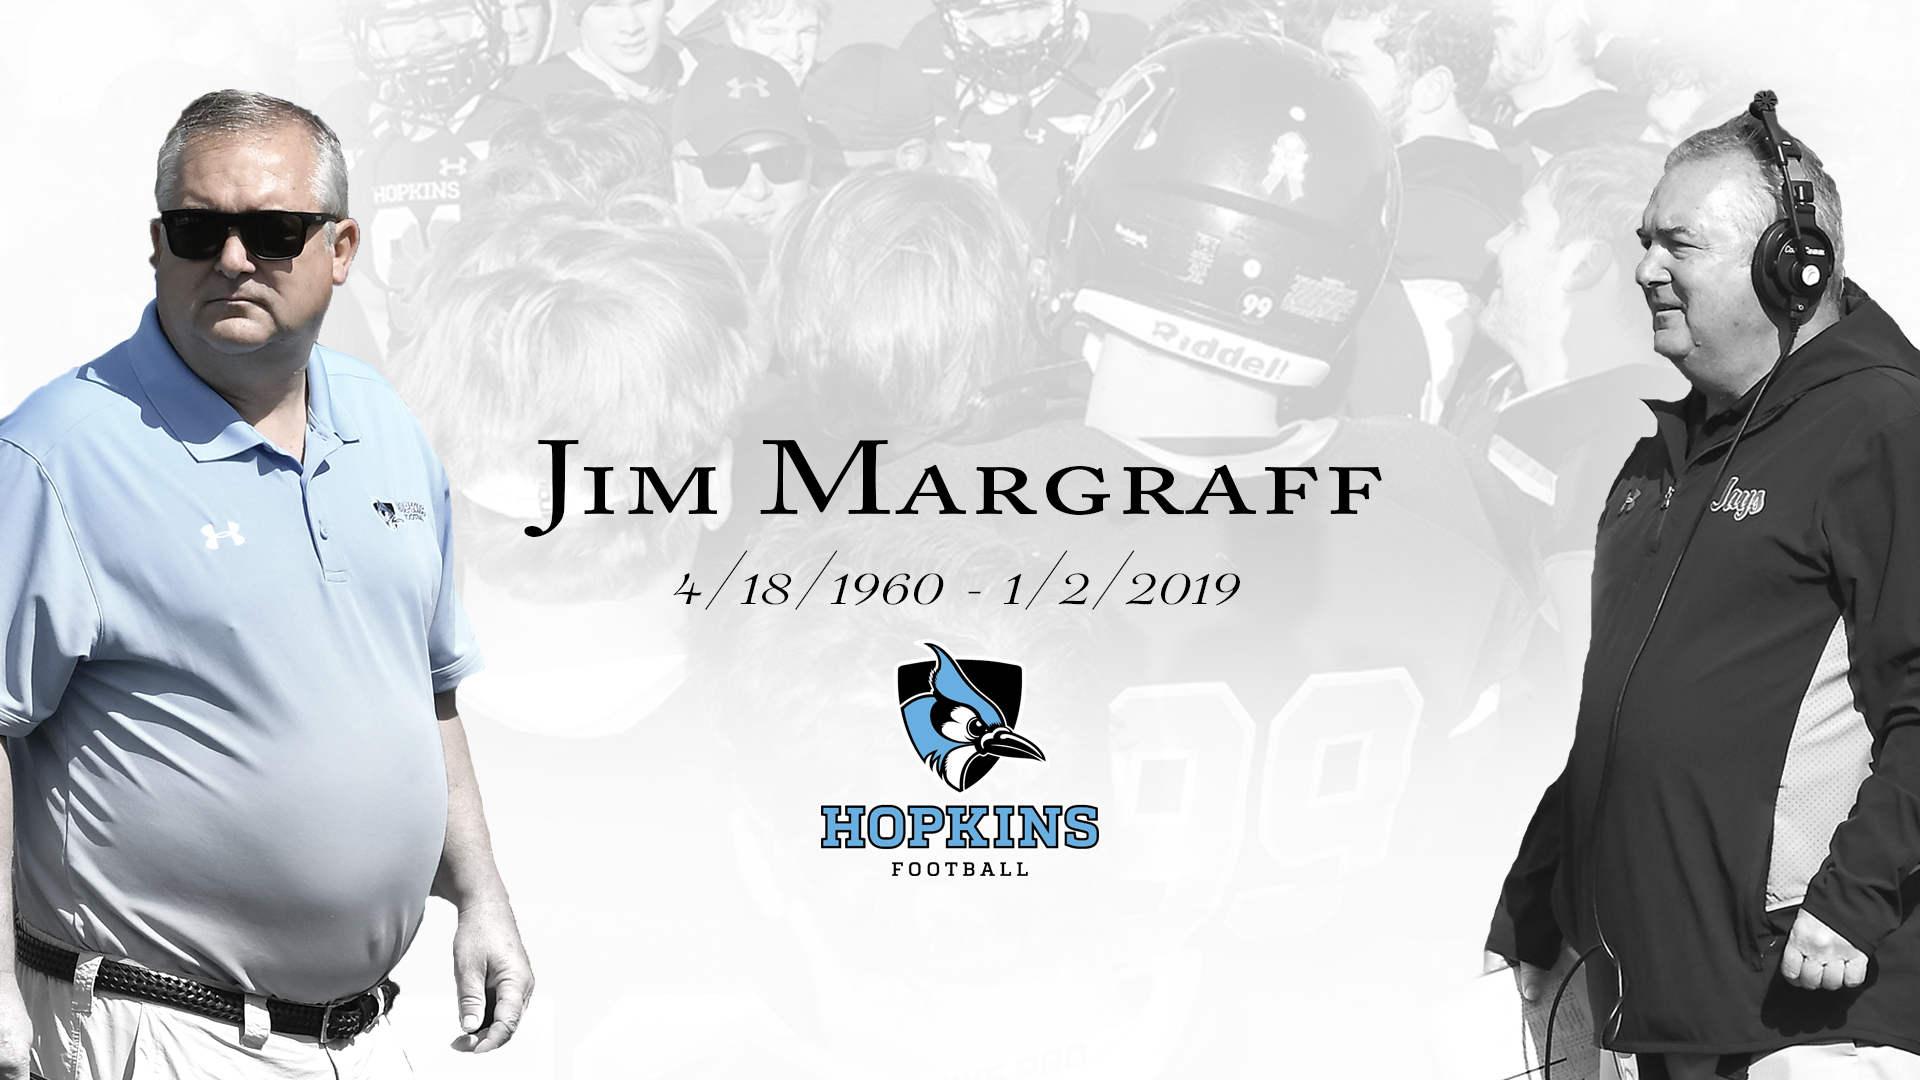 Jim Margraff was the winningest football coach in Johns Hopkins and Centennial Conference history.